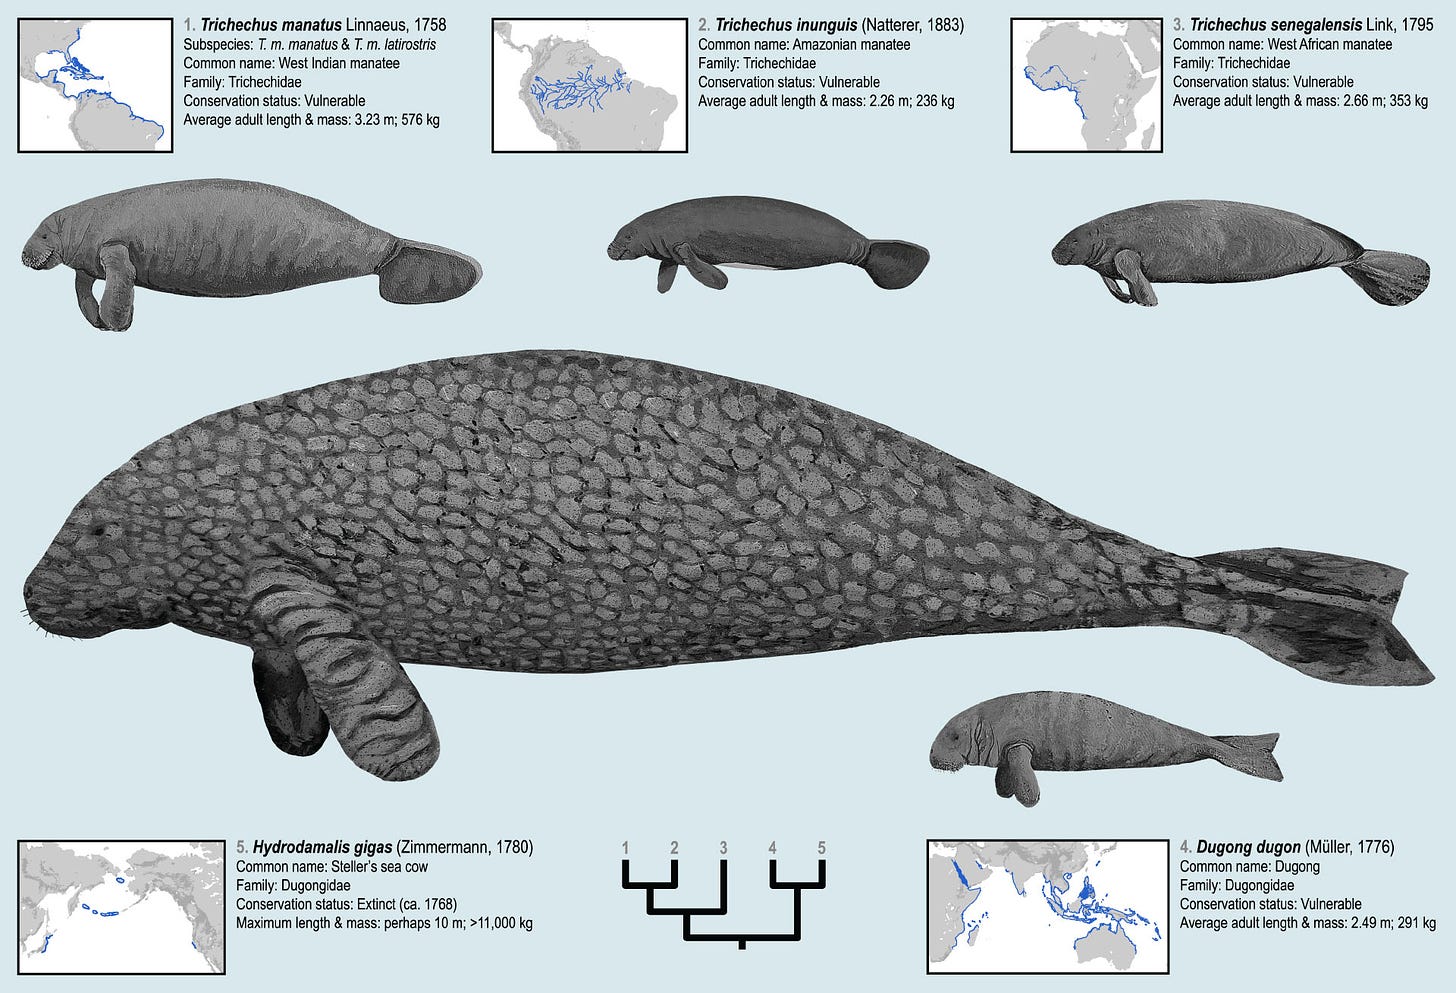 New Research Tracks Evolution of Sea Cows | Sci.News